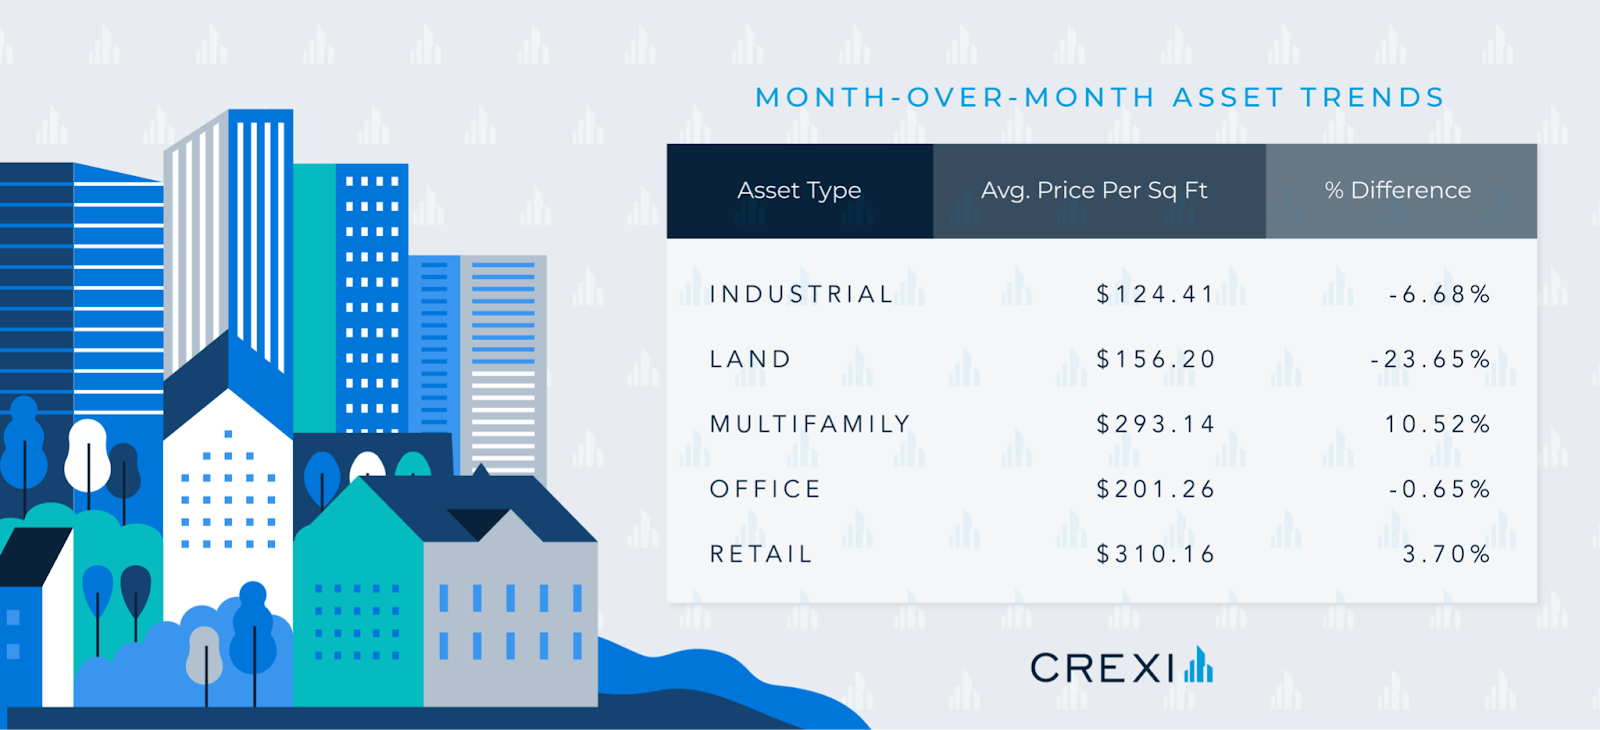 May monthly asking price per sf trends for Crexi asset classes